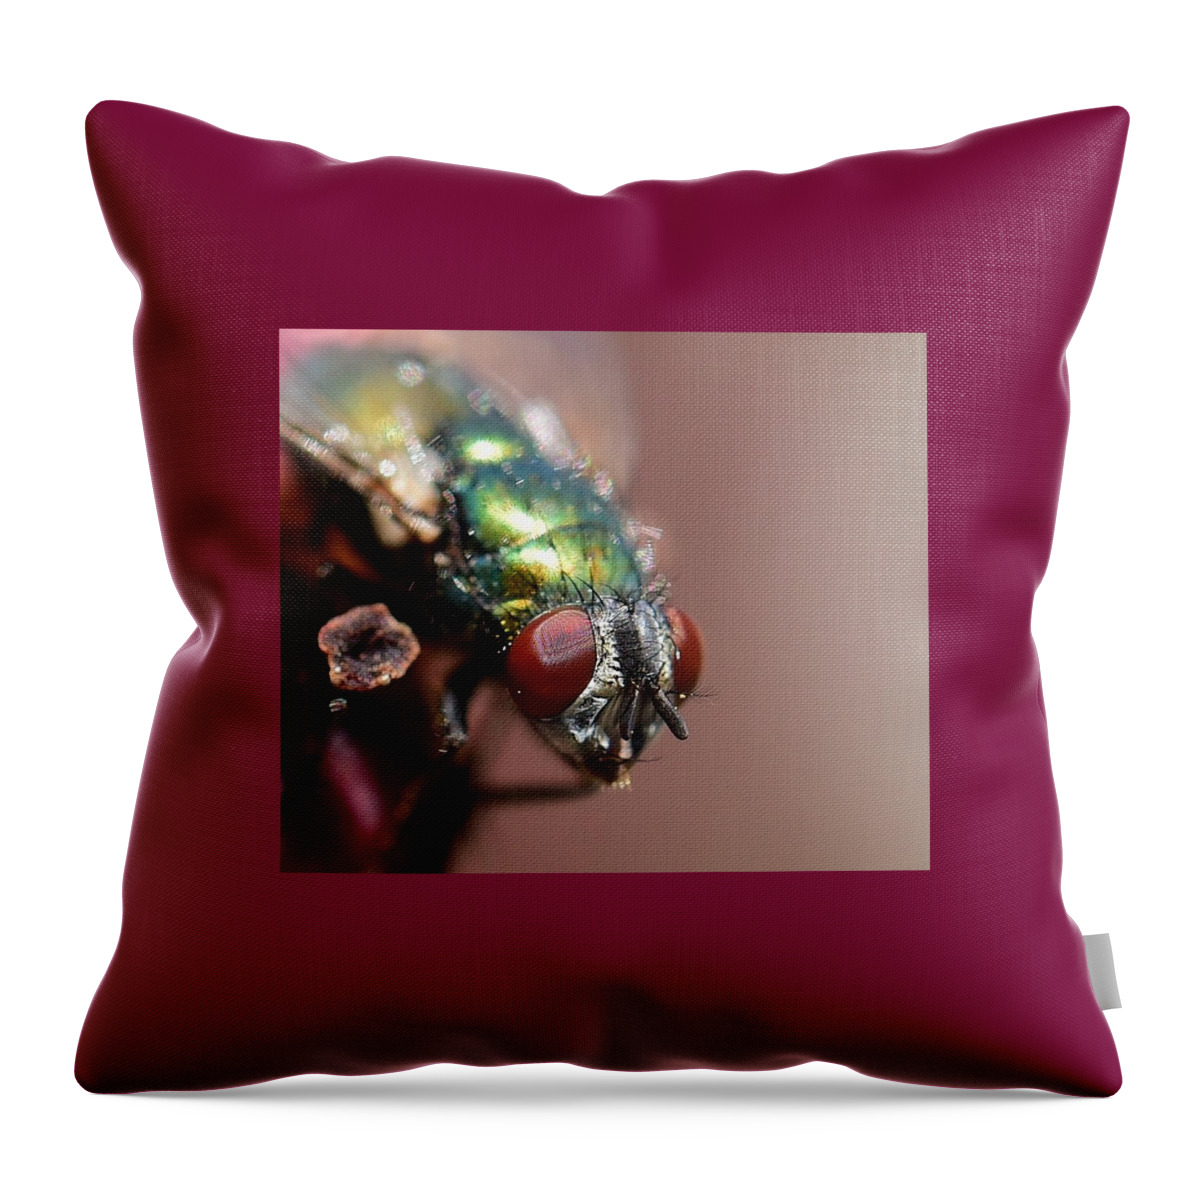 Linda Brody Throw Pillow featuring the photograph Fly Eyes by Linda Brody